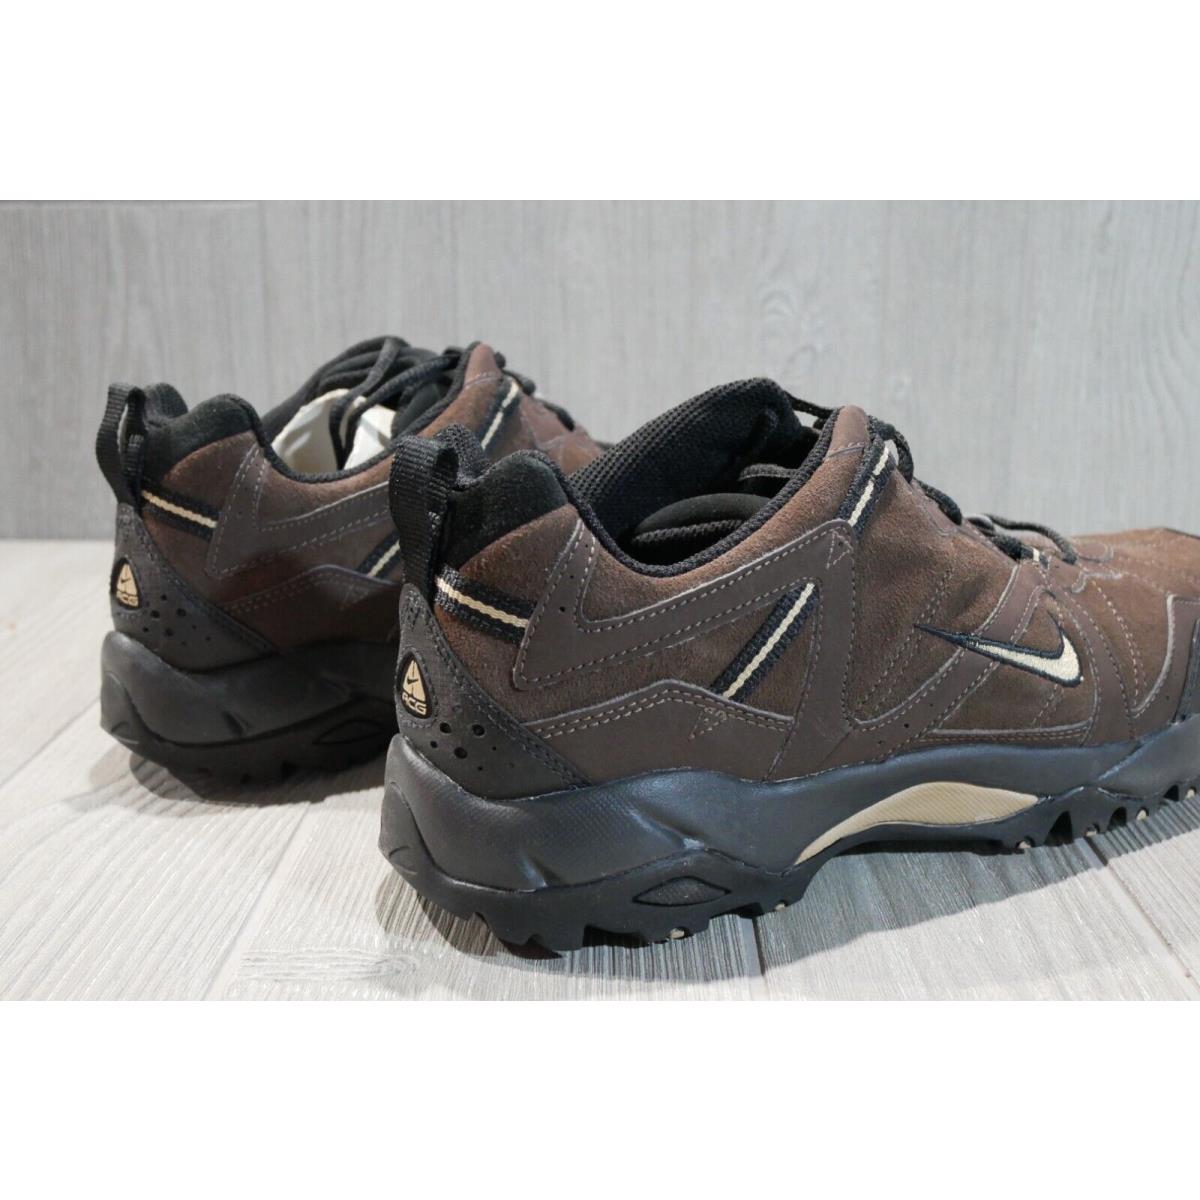 Nike shoes Bandolier - Brown 3